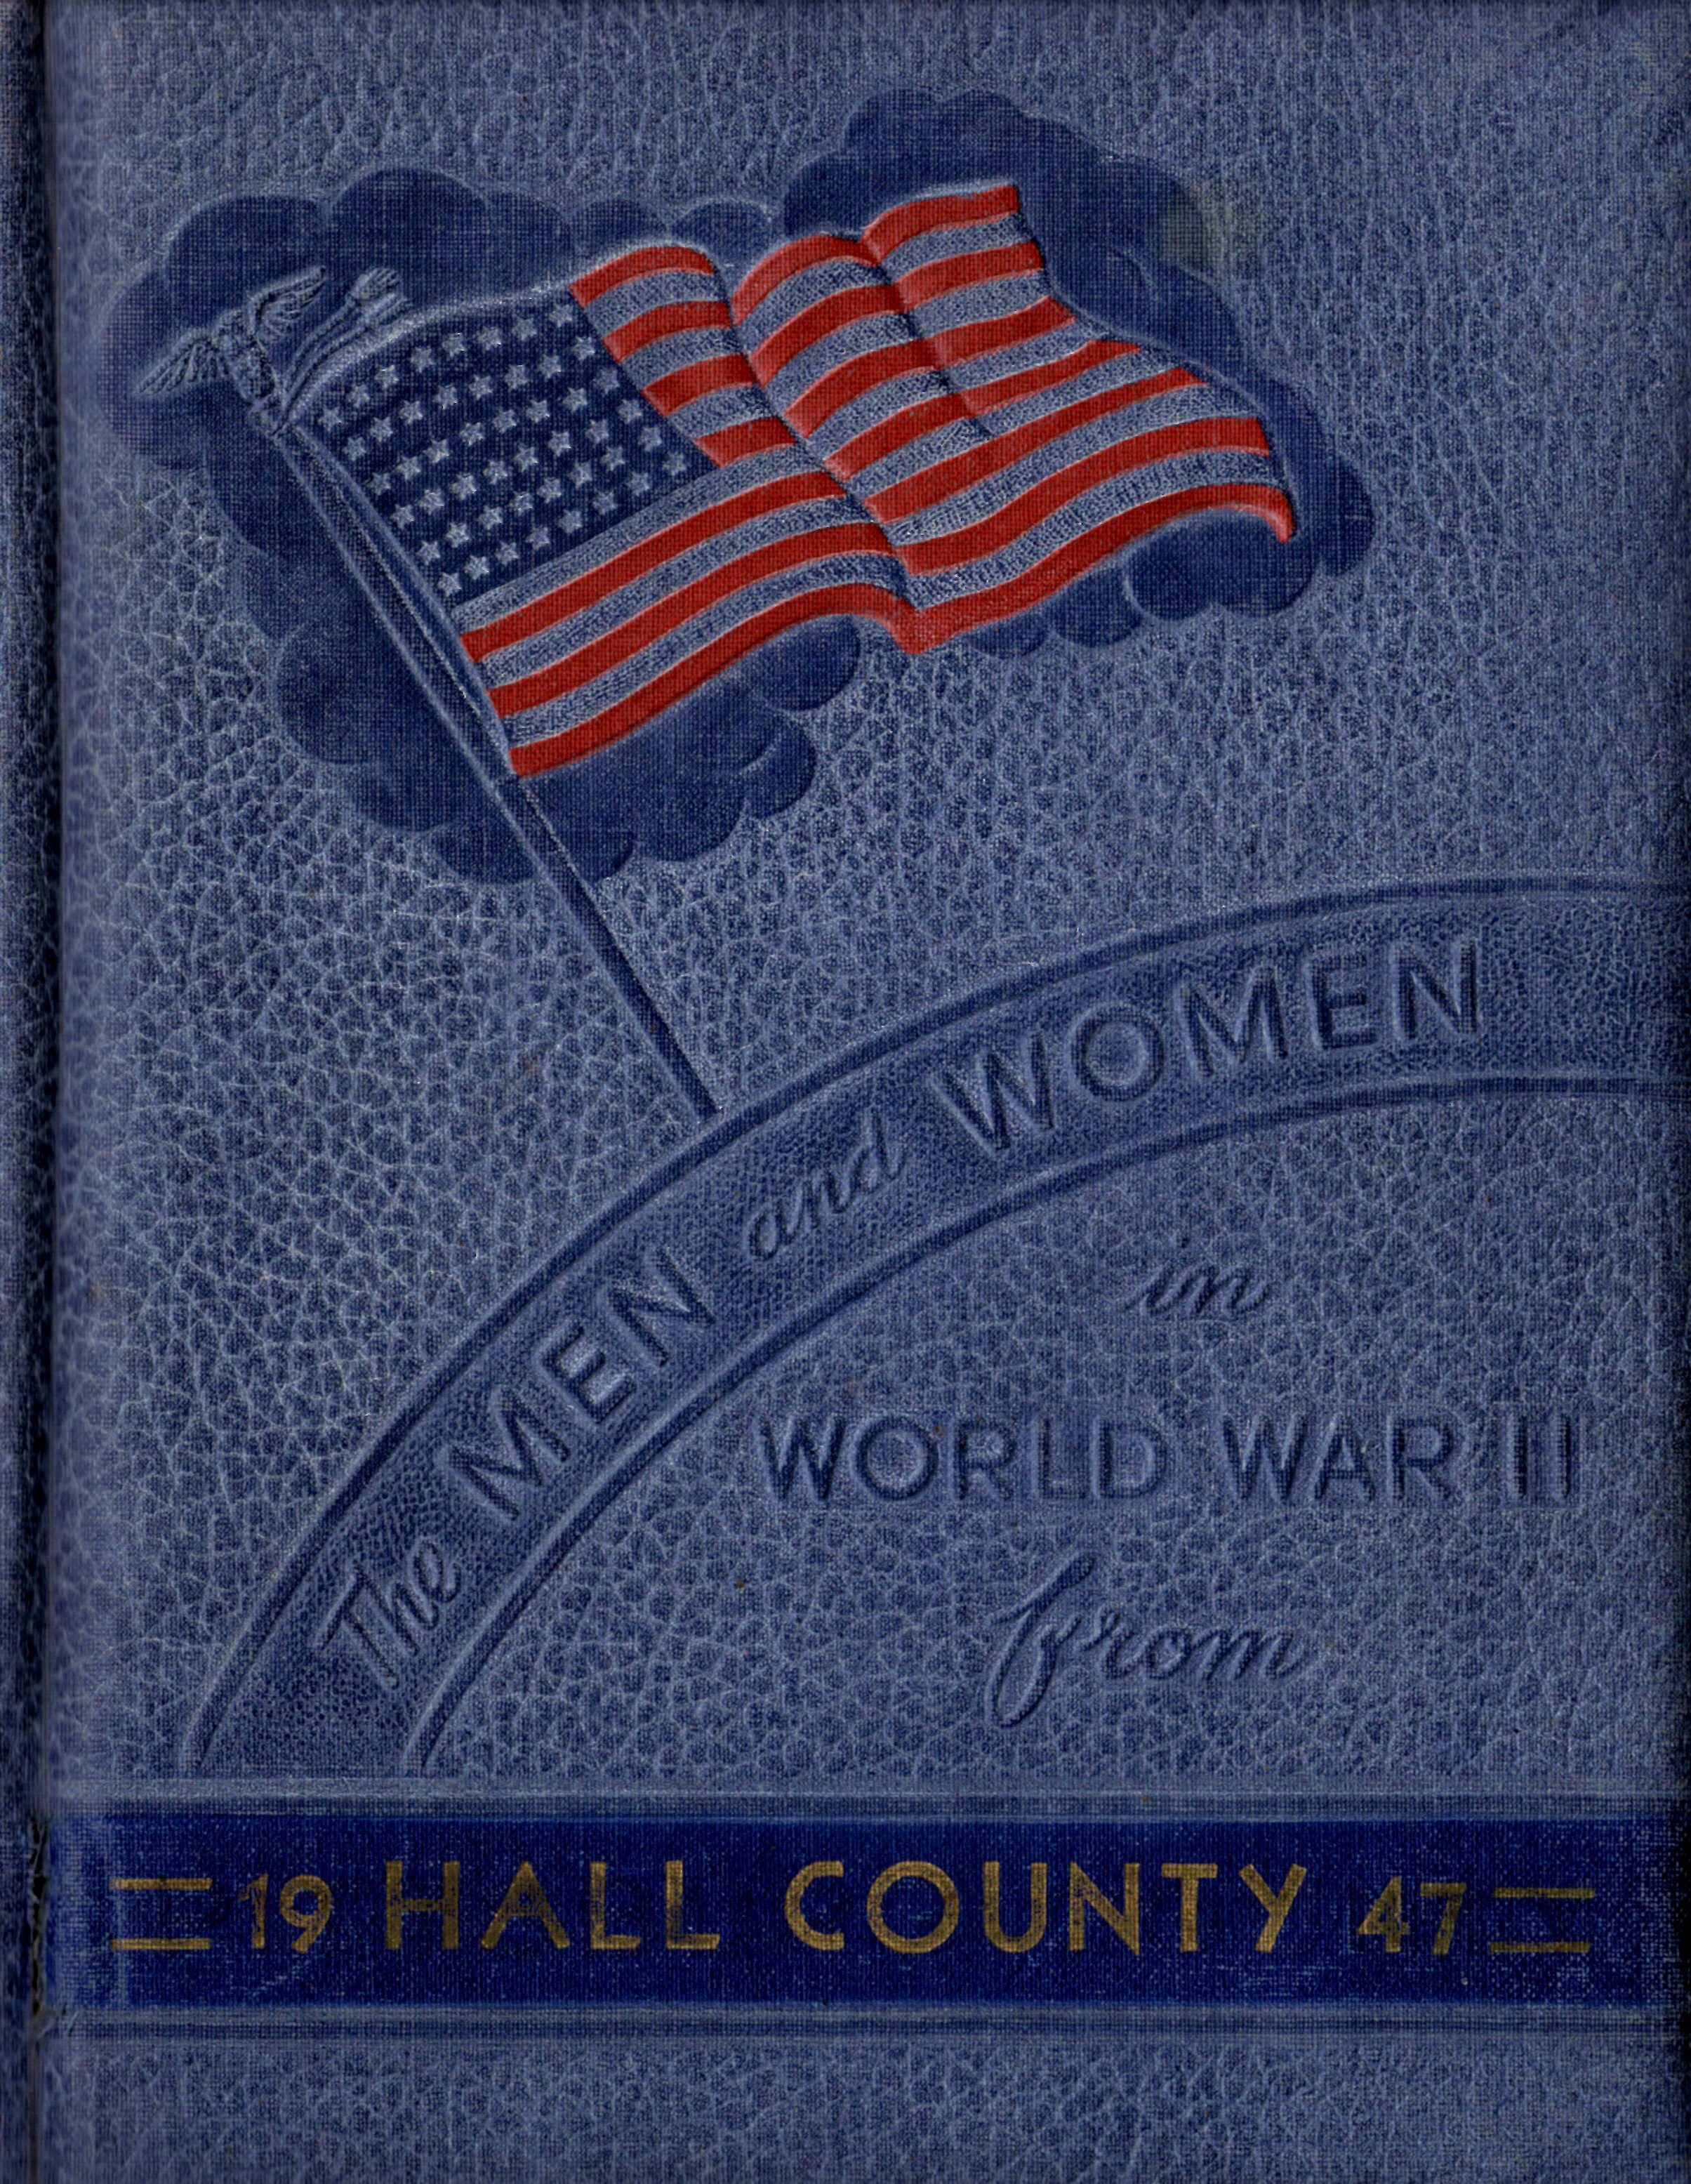 Men and women in the Armed Forces from Hall County Texas World War II 2 WW2 WWII